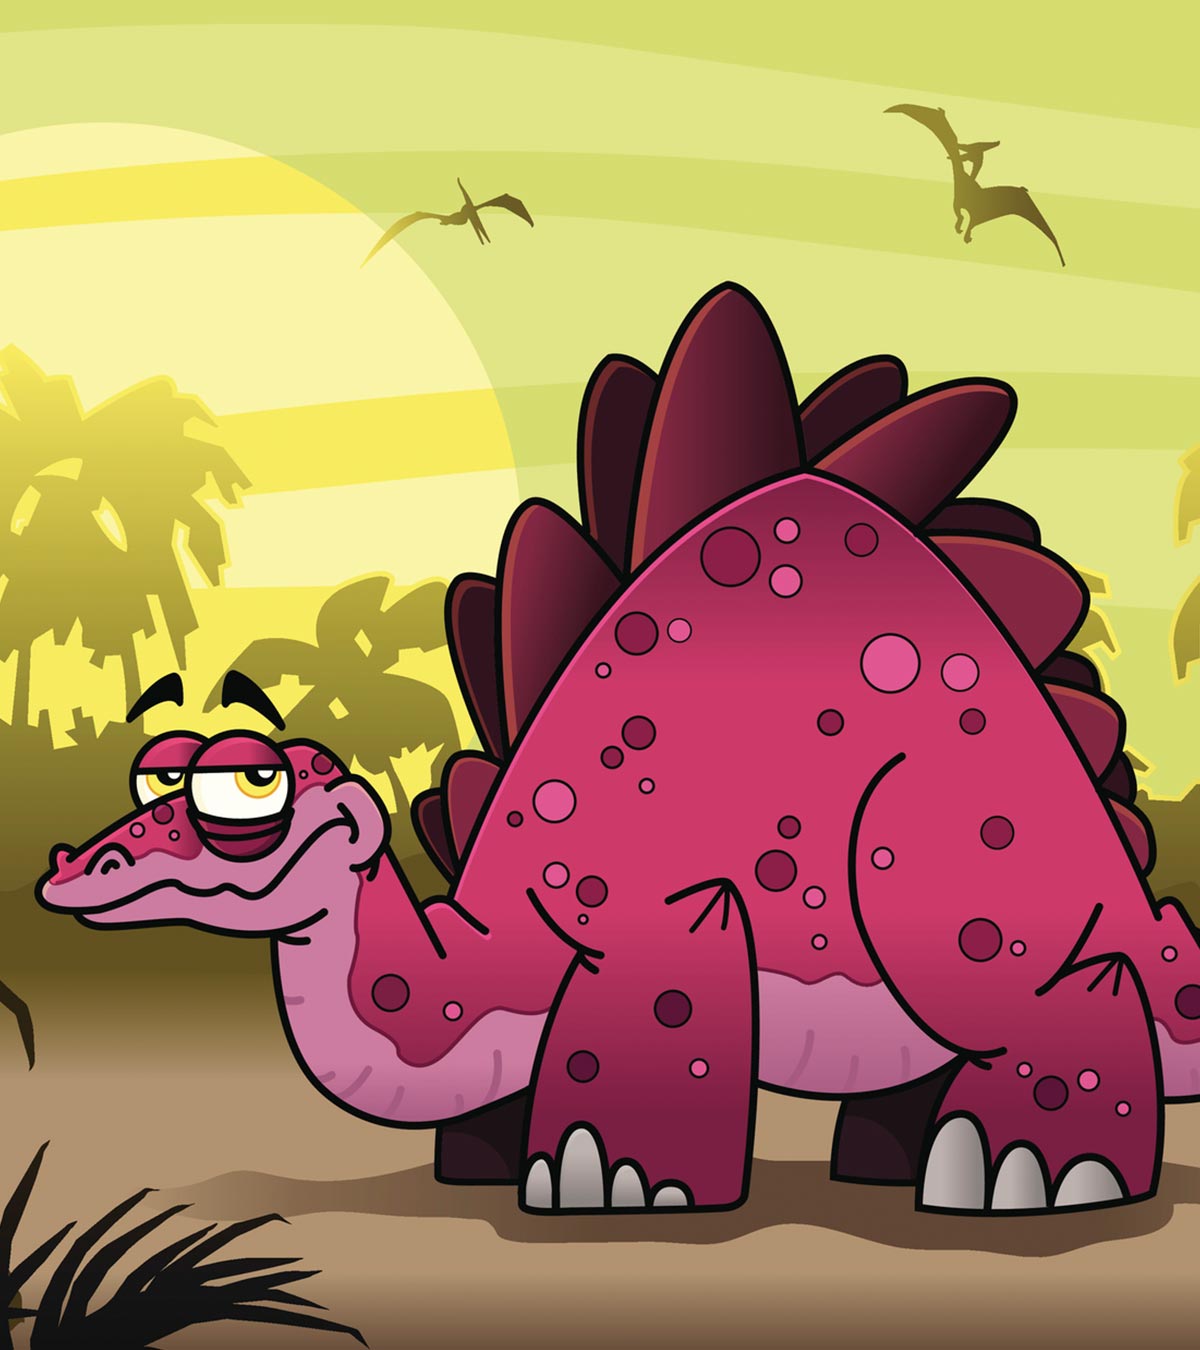 100 Silliest And Funny Dinosaur Jokes For Kids